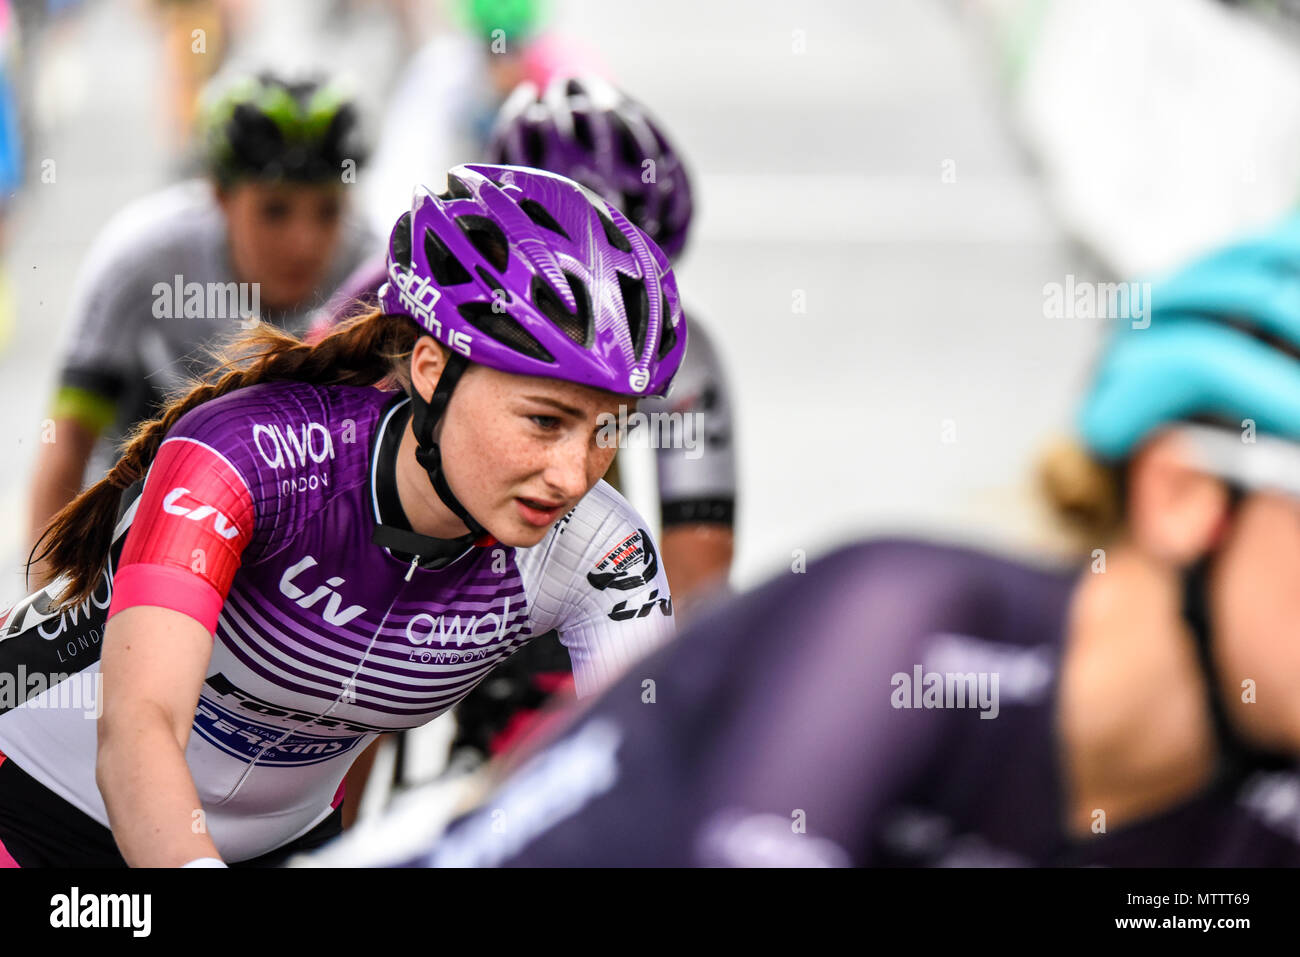 Emily Bridson of team Admiral LIV AWOL racing in the elite women's 2018 OVO Energy Tour Series cycle race at Wembley, London, UK. Round 7 bike race Stock Photo